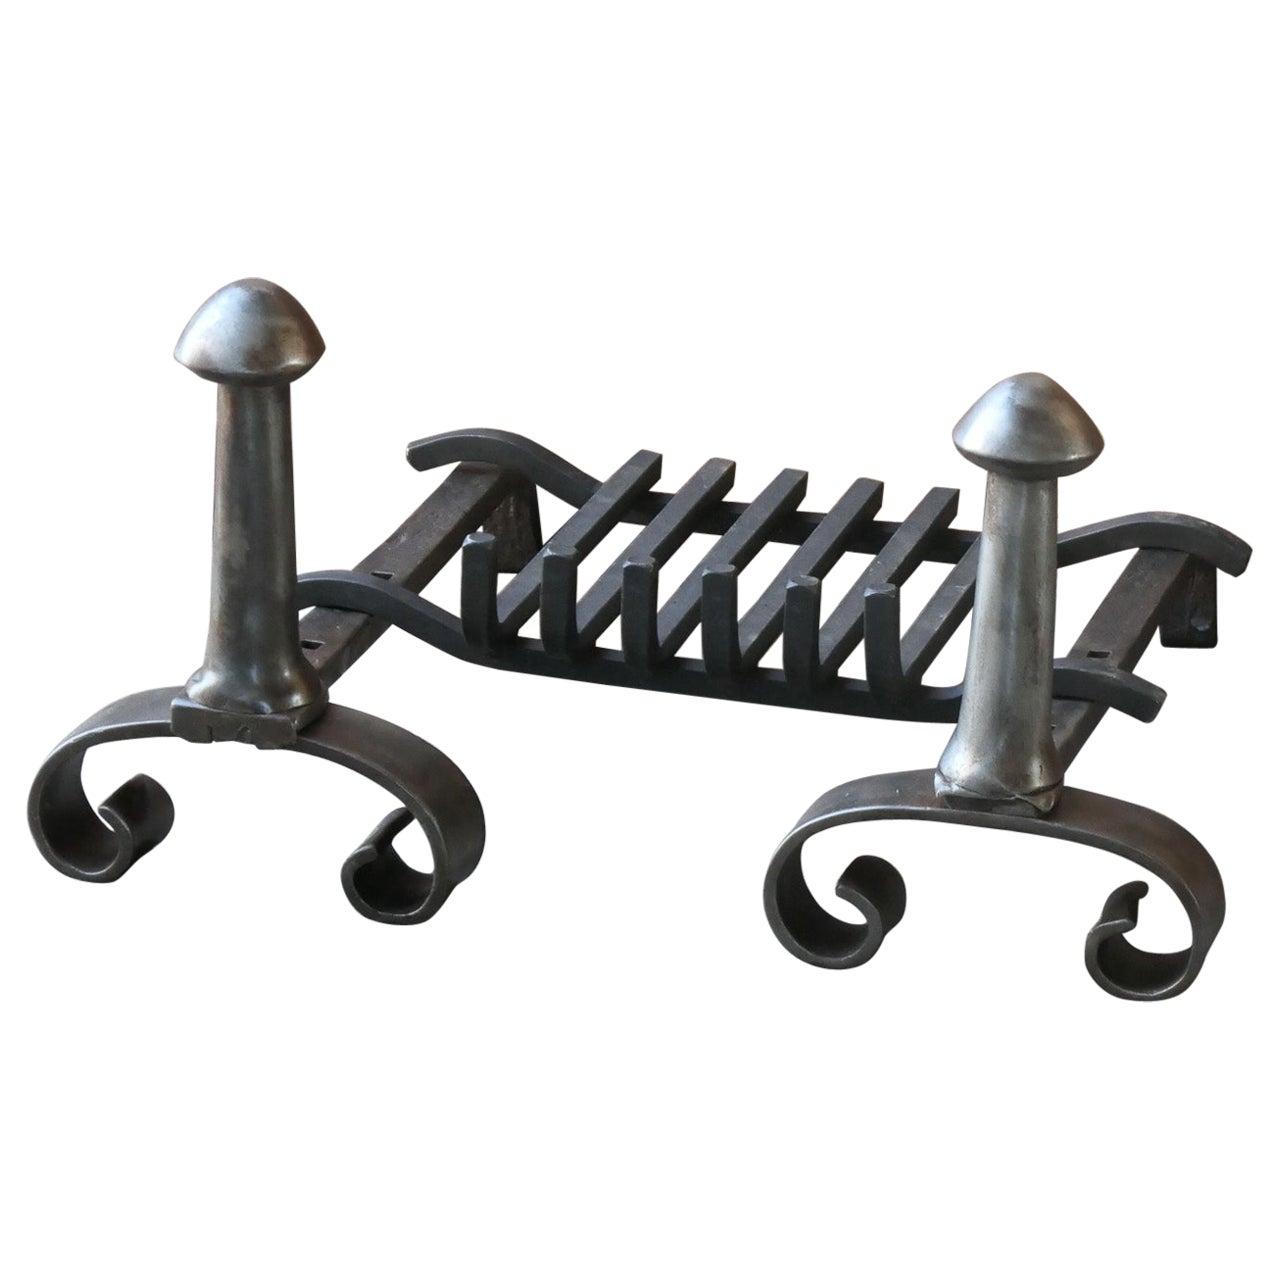 Antique French Napoleon III Fire Grate, Fireplace Grate, 19th Century For Sale